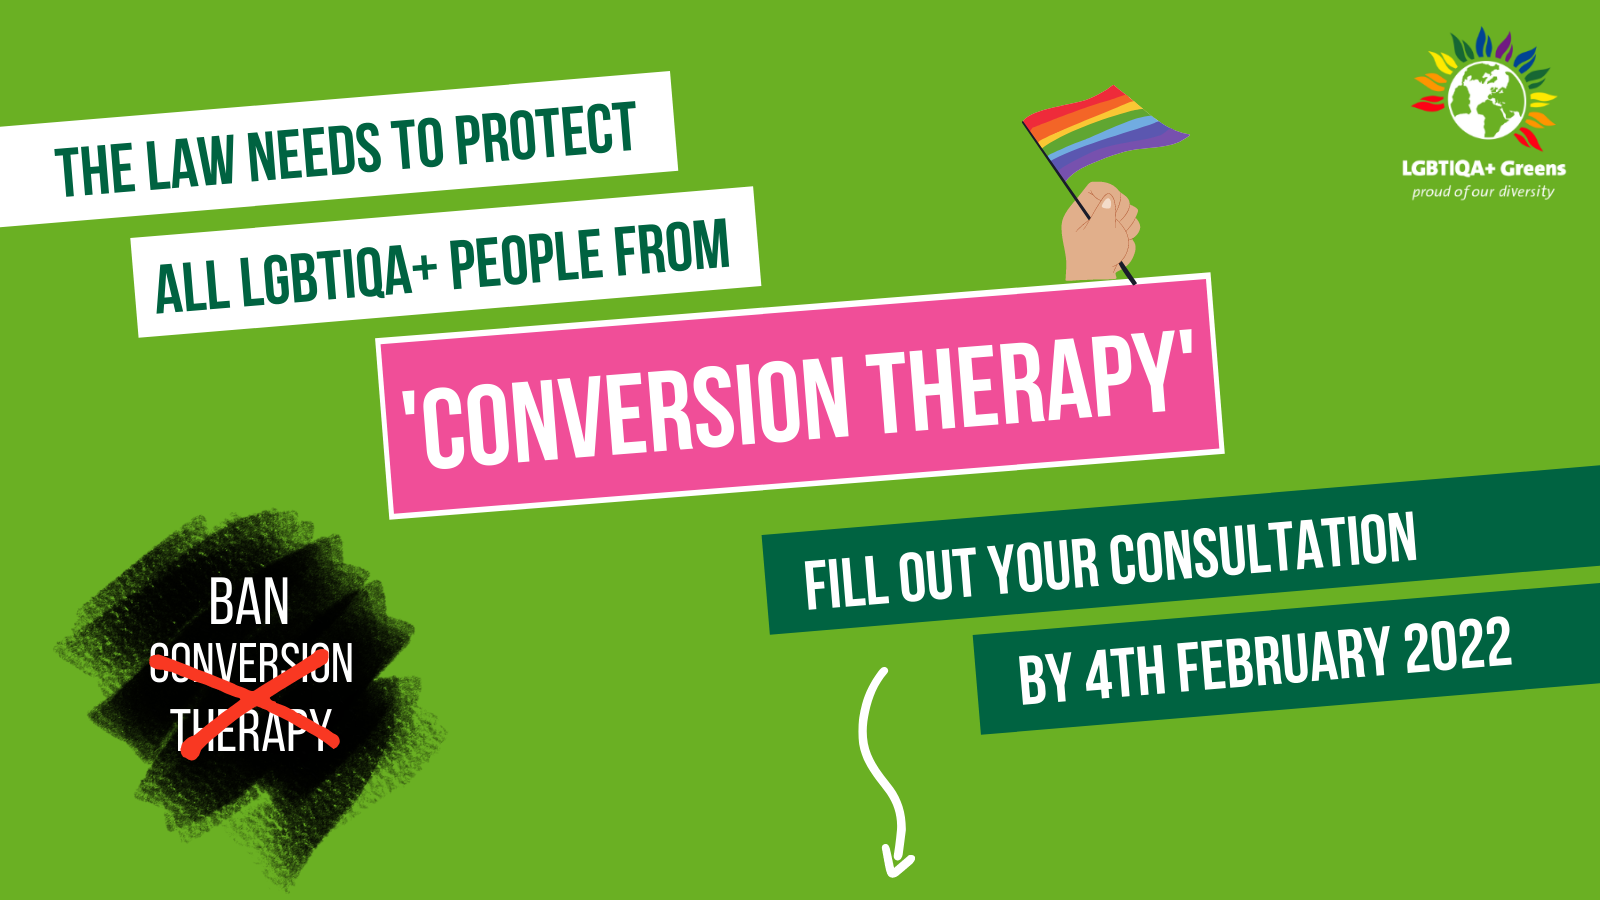 Image shows a graphic with a green background asking people to help ban conversion therapy. On the graphic is the text: "the law needs to protect all LGBTIQA+ people from 'conversion therapy'. Fill out your consultation by the 4th of February 2022." In the top right of the graphic is the LGBTIQA+ green party logo, with our slogan "proud of our diversity".